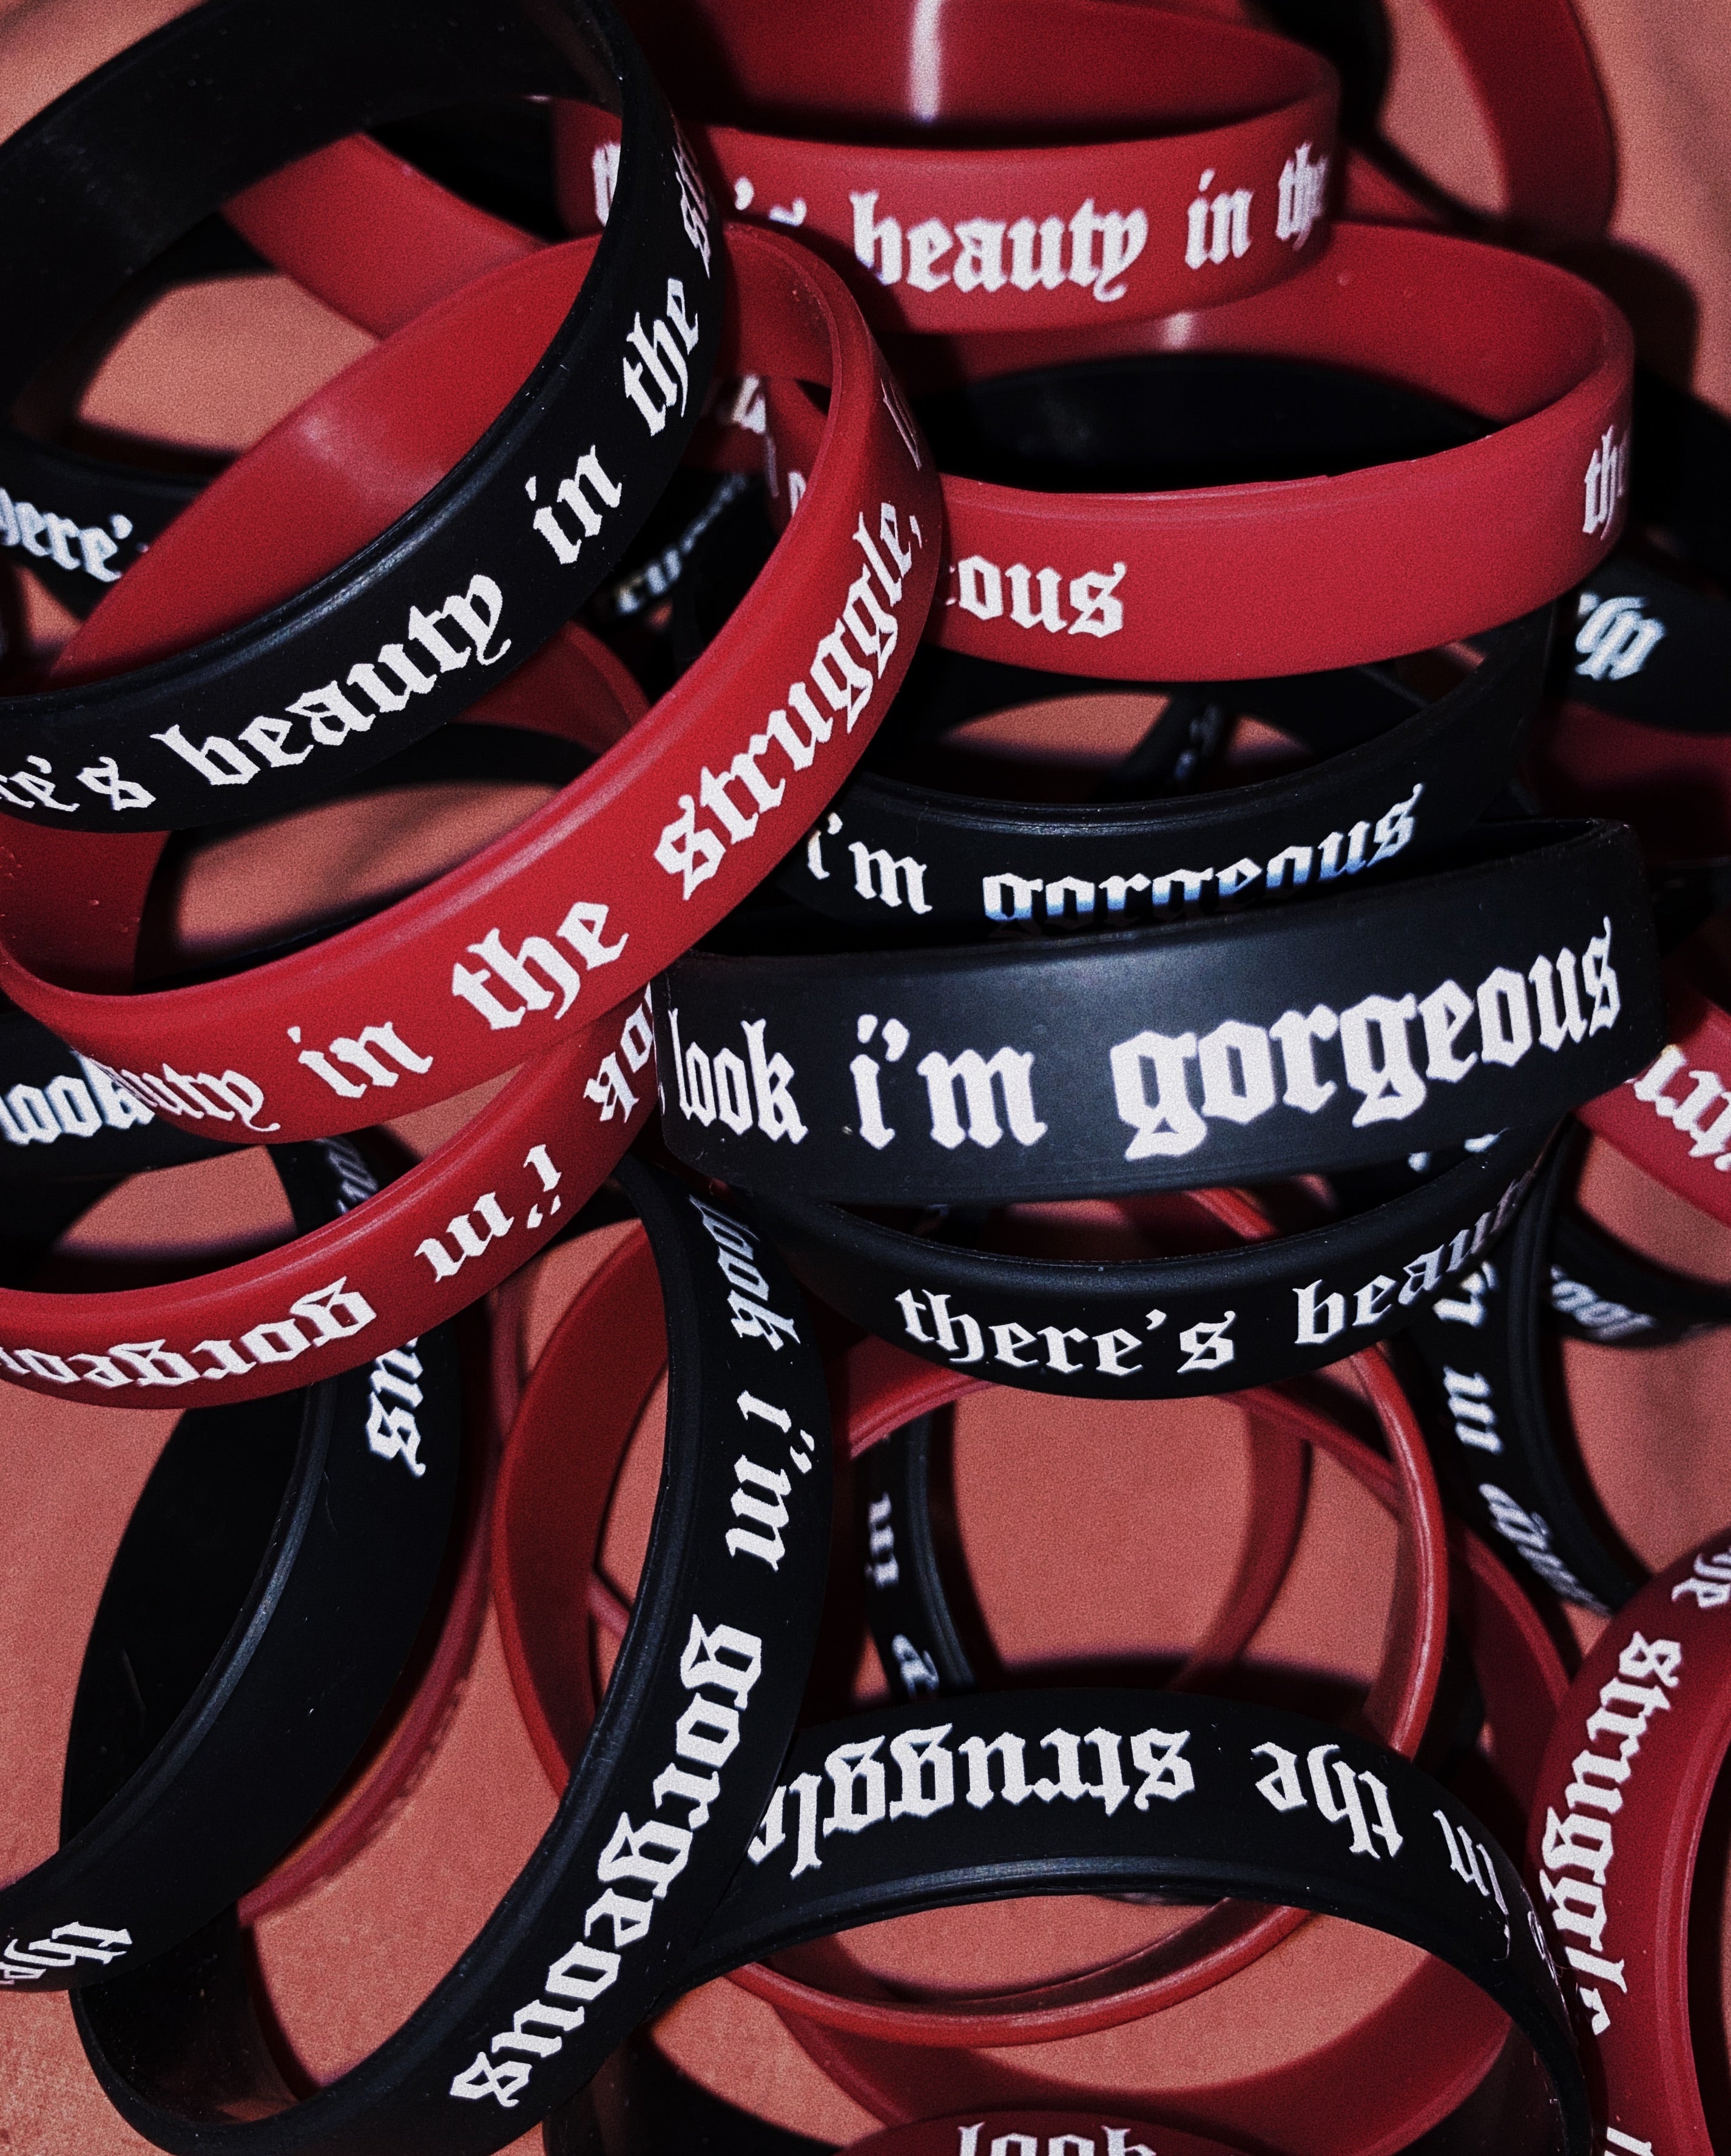 “THERE’S BEAUTY IN THE STRUGGLE, LOOK I’M GORGEOUS” WRISTBAND